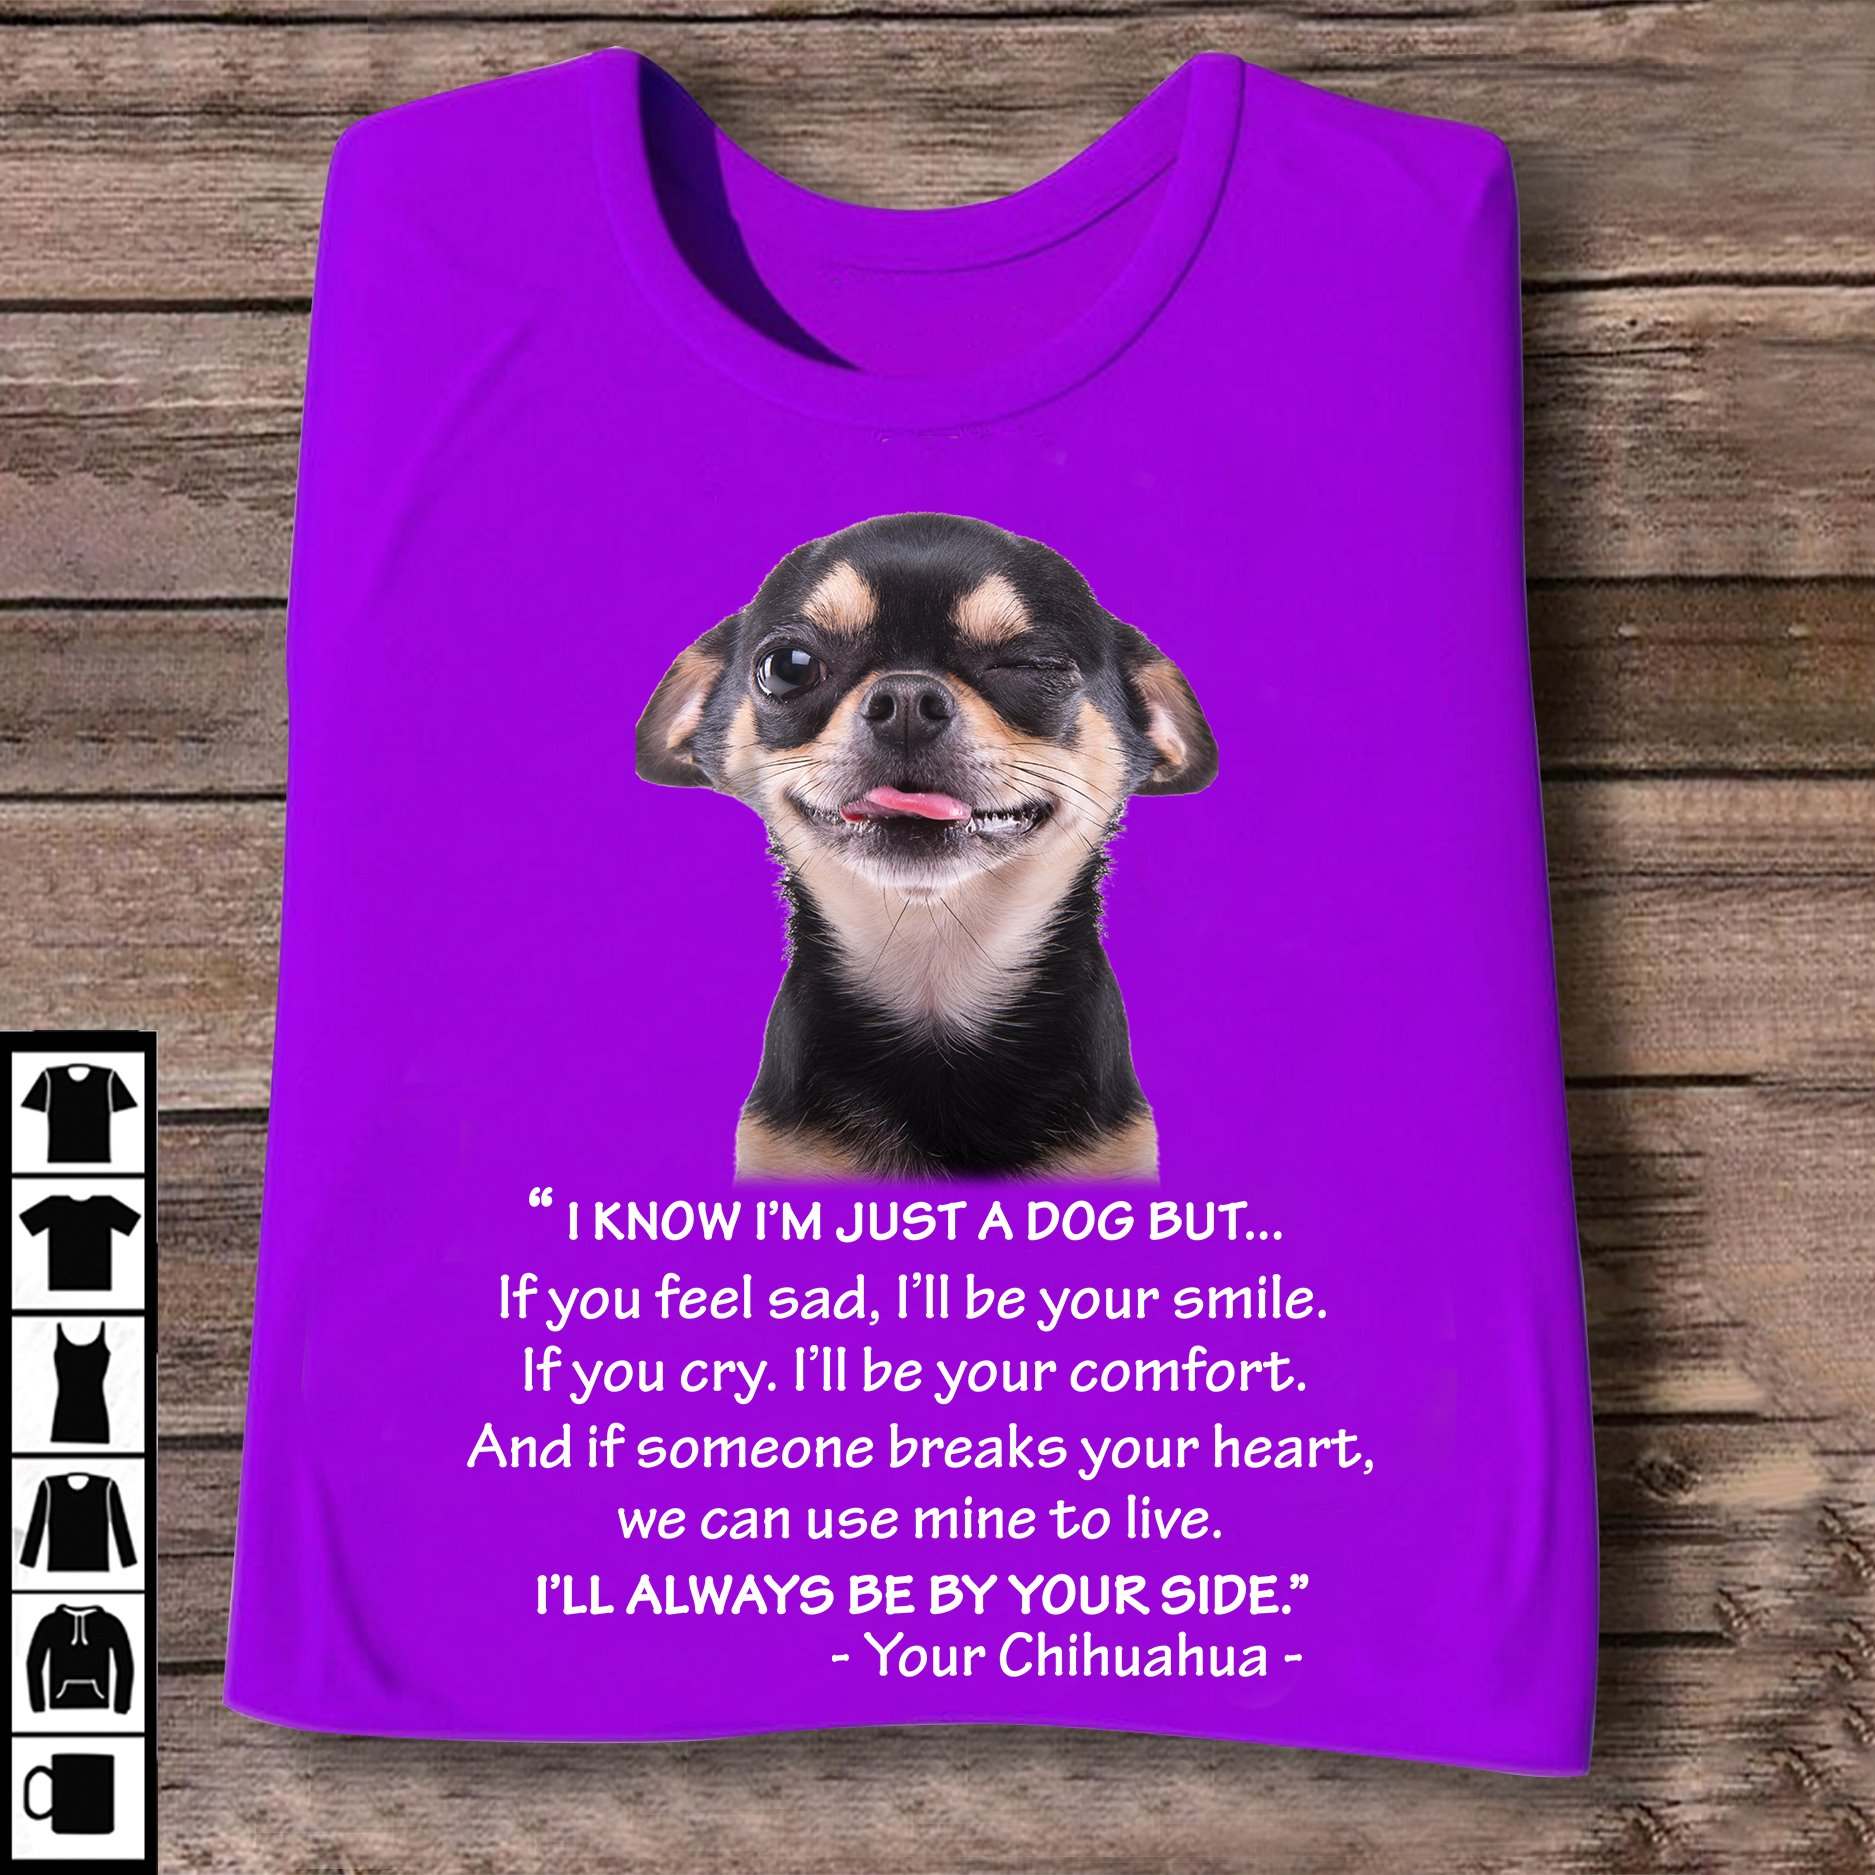 I know I'm just a dog but if you feel sad, I'll be your smile - Chihuahua dog, chihuahua puppy